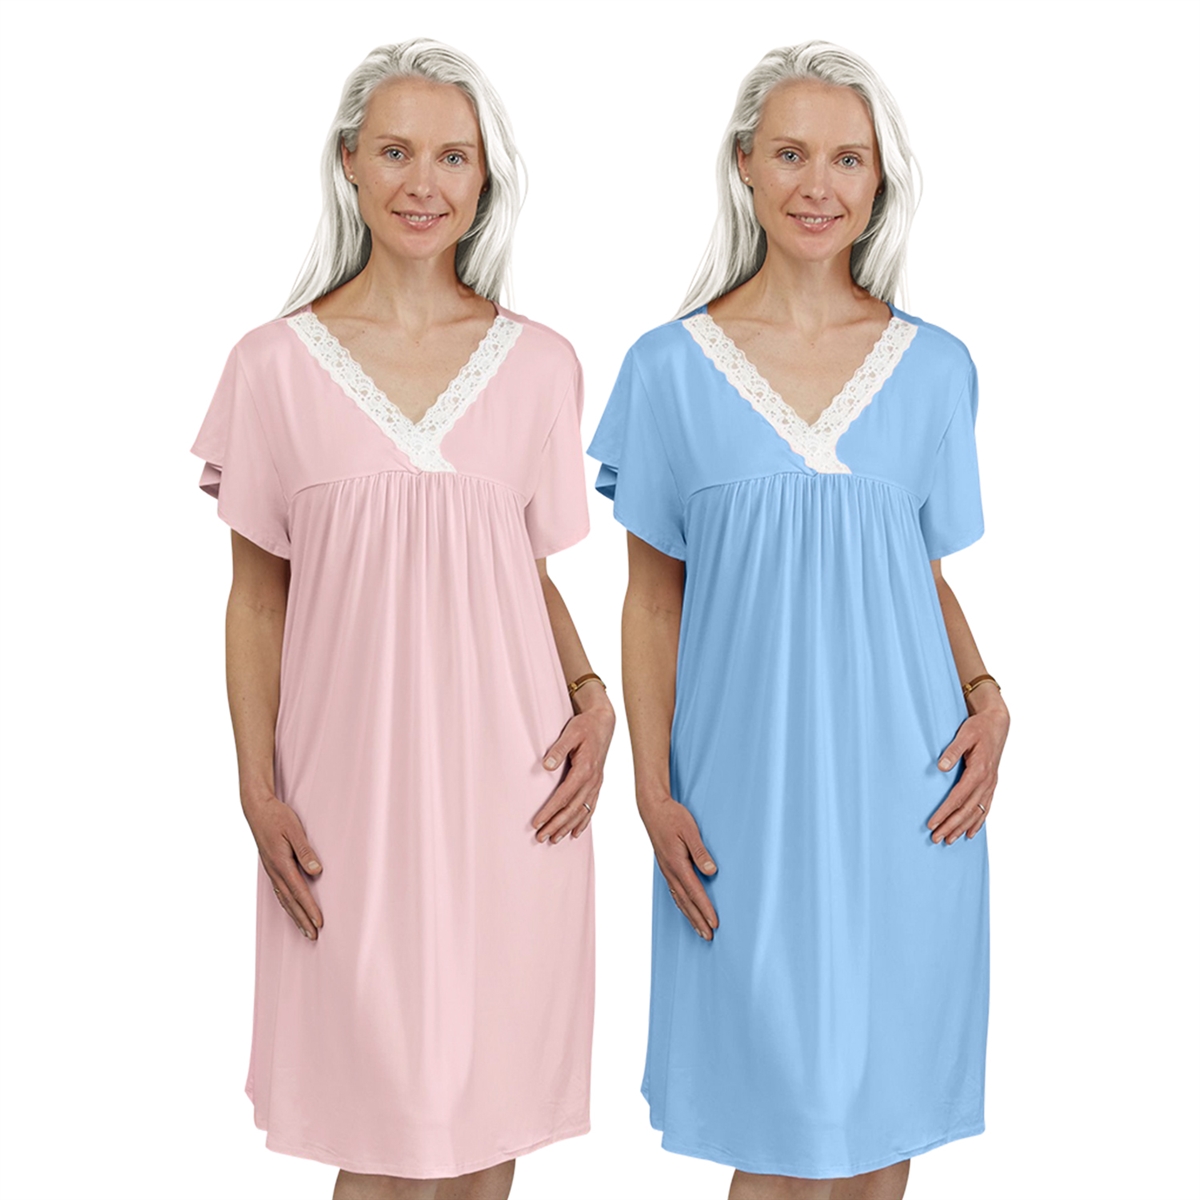 Dignity Pajamas 2 Pack-Womens 'So Soft' Criss cross Lace Trim Nightgown Cap  sleeve with REGULAR Back